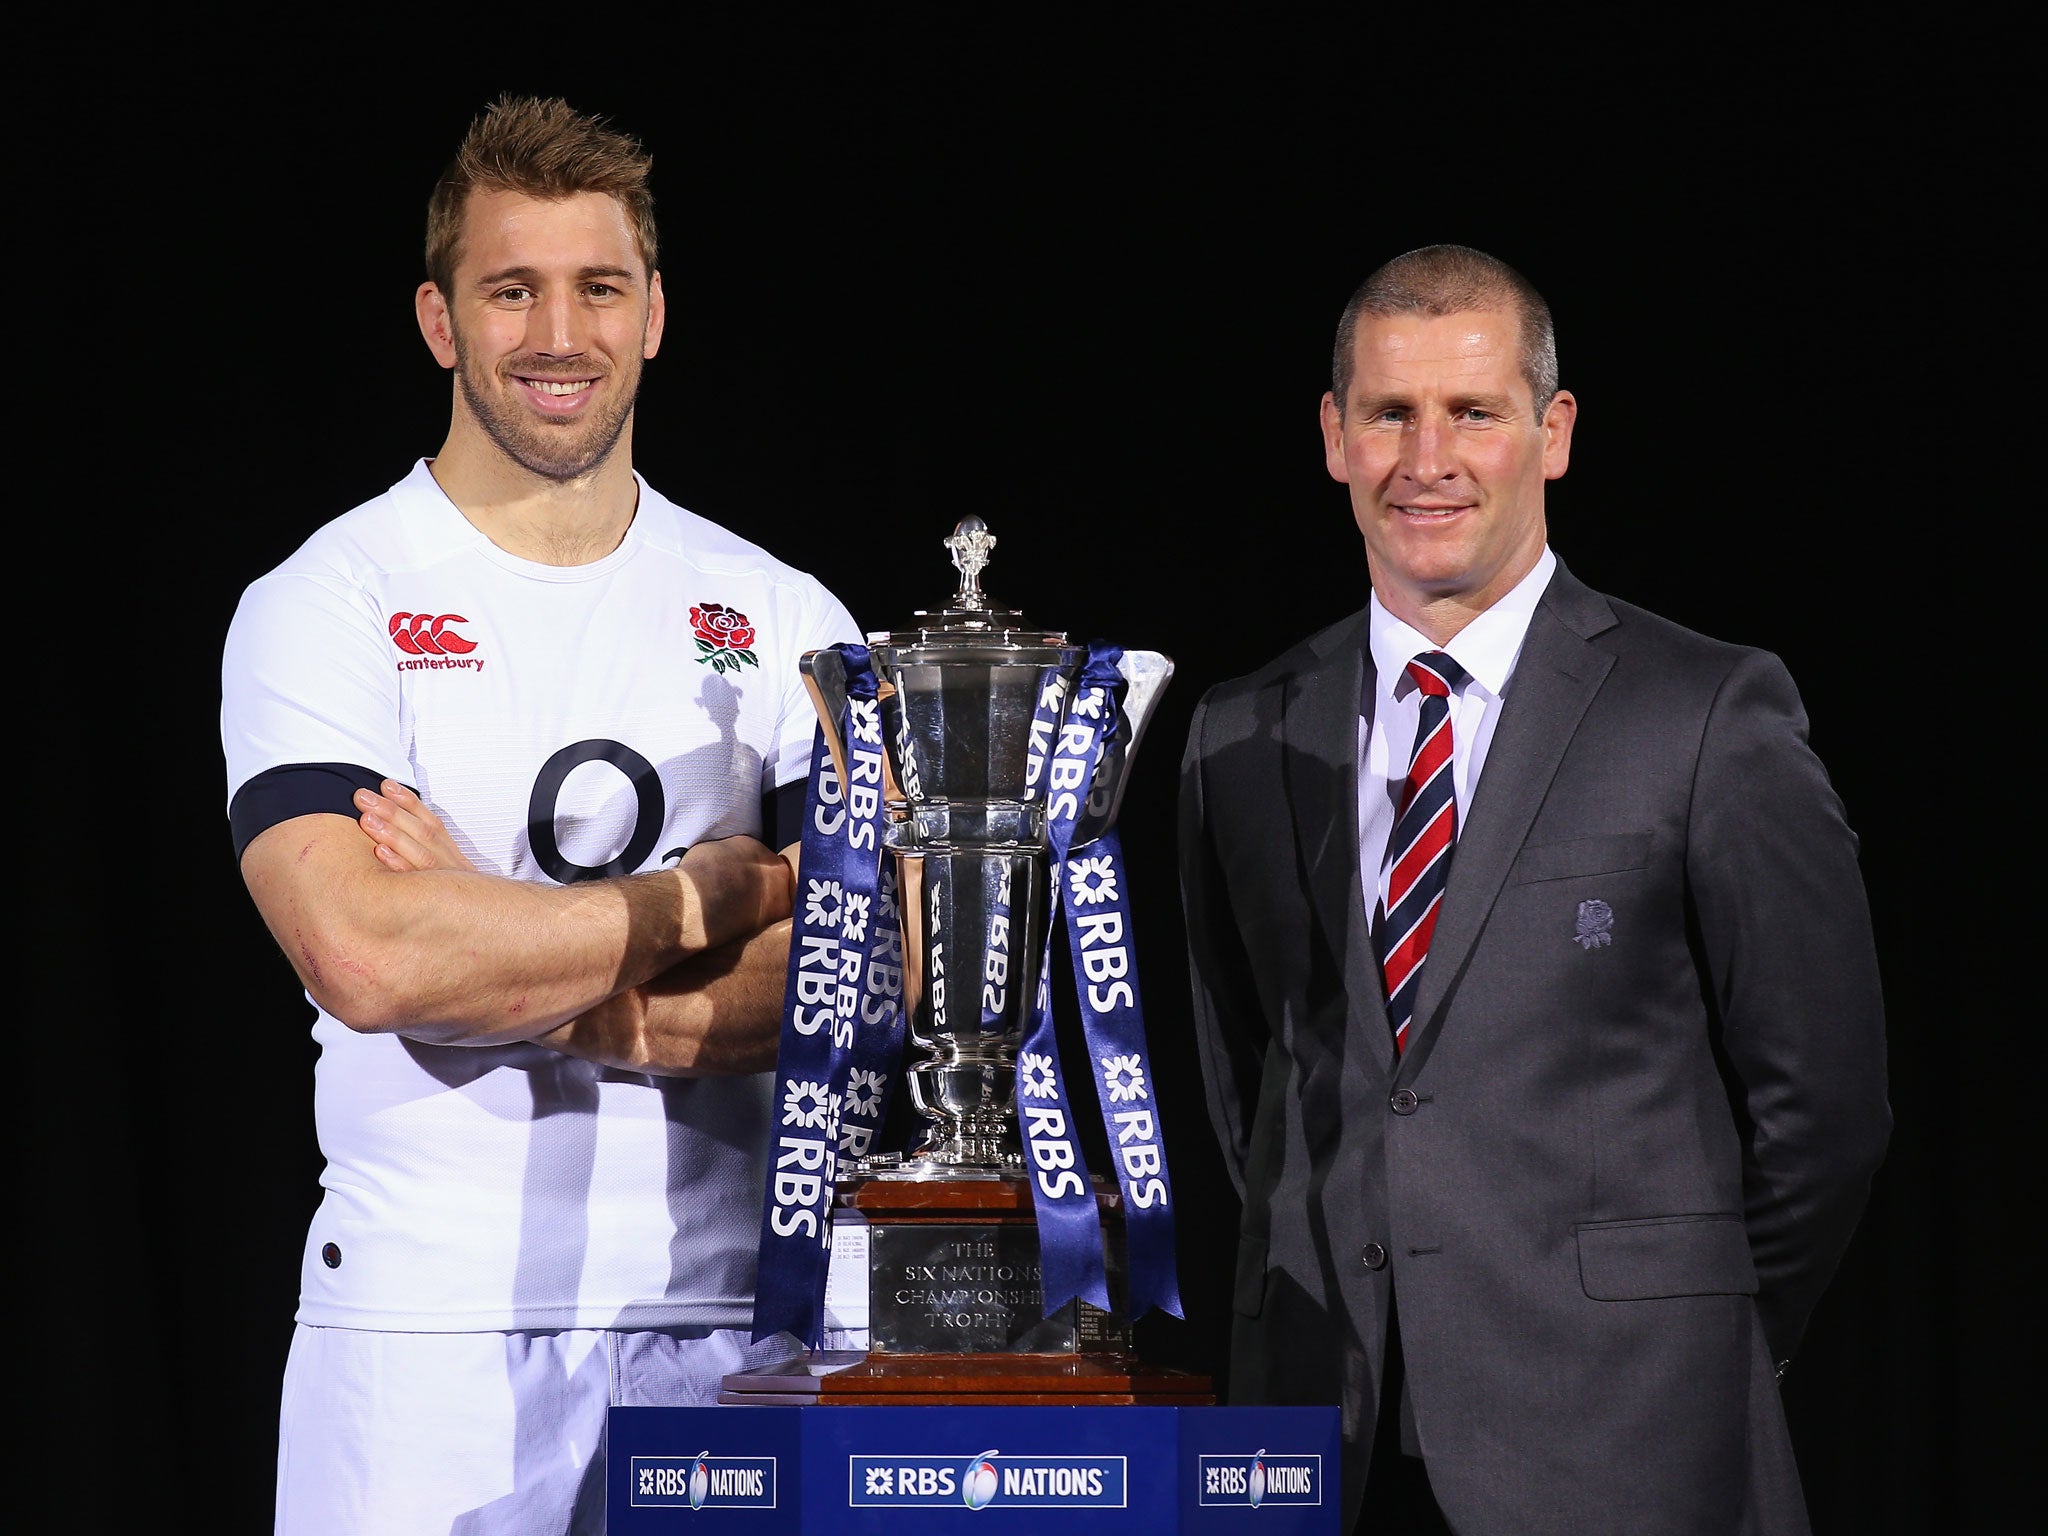 Chris Robshaw and Stuart Lancaster hope to guide England to Six Nations glory